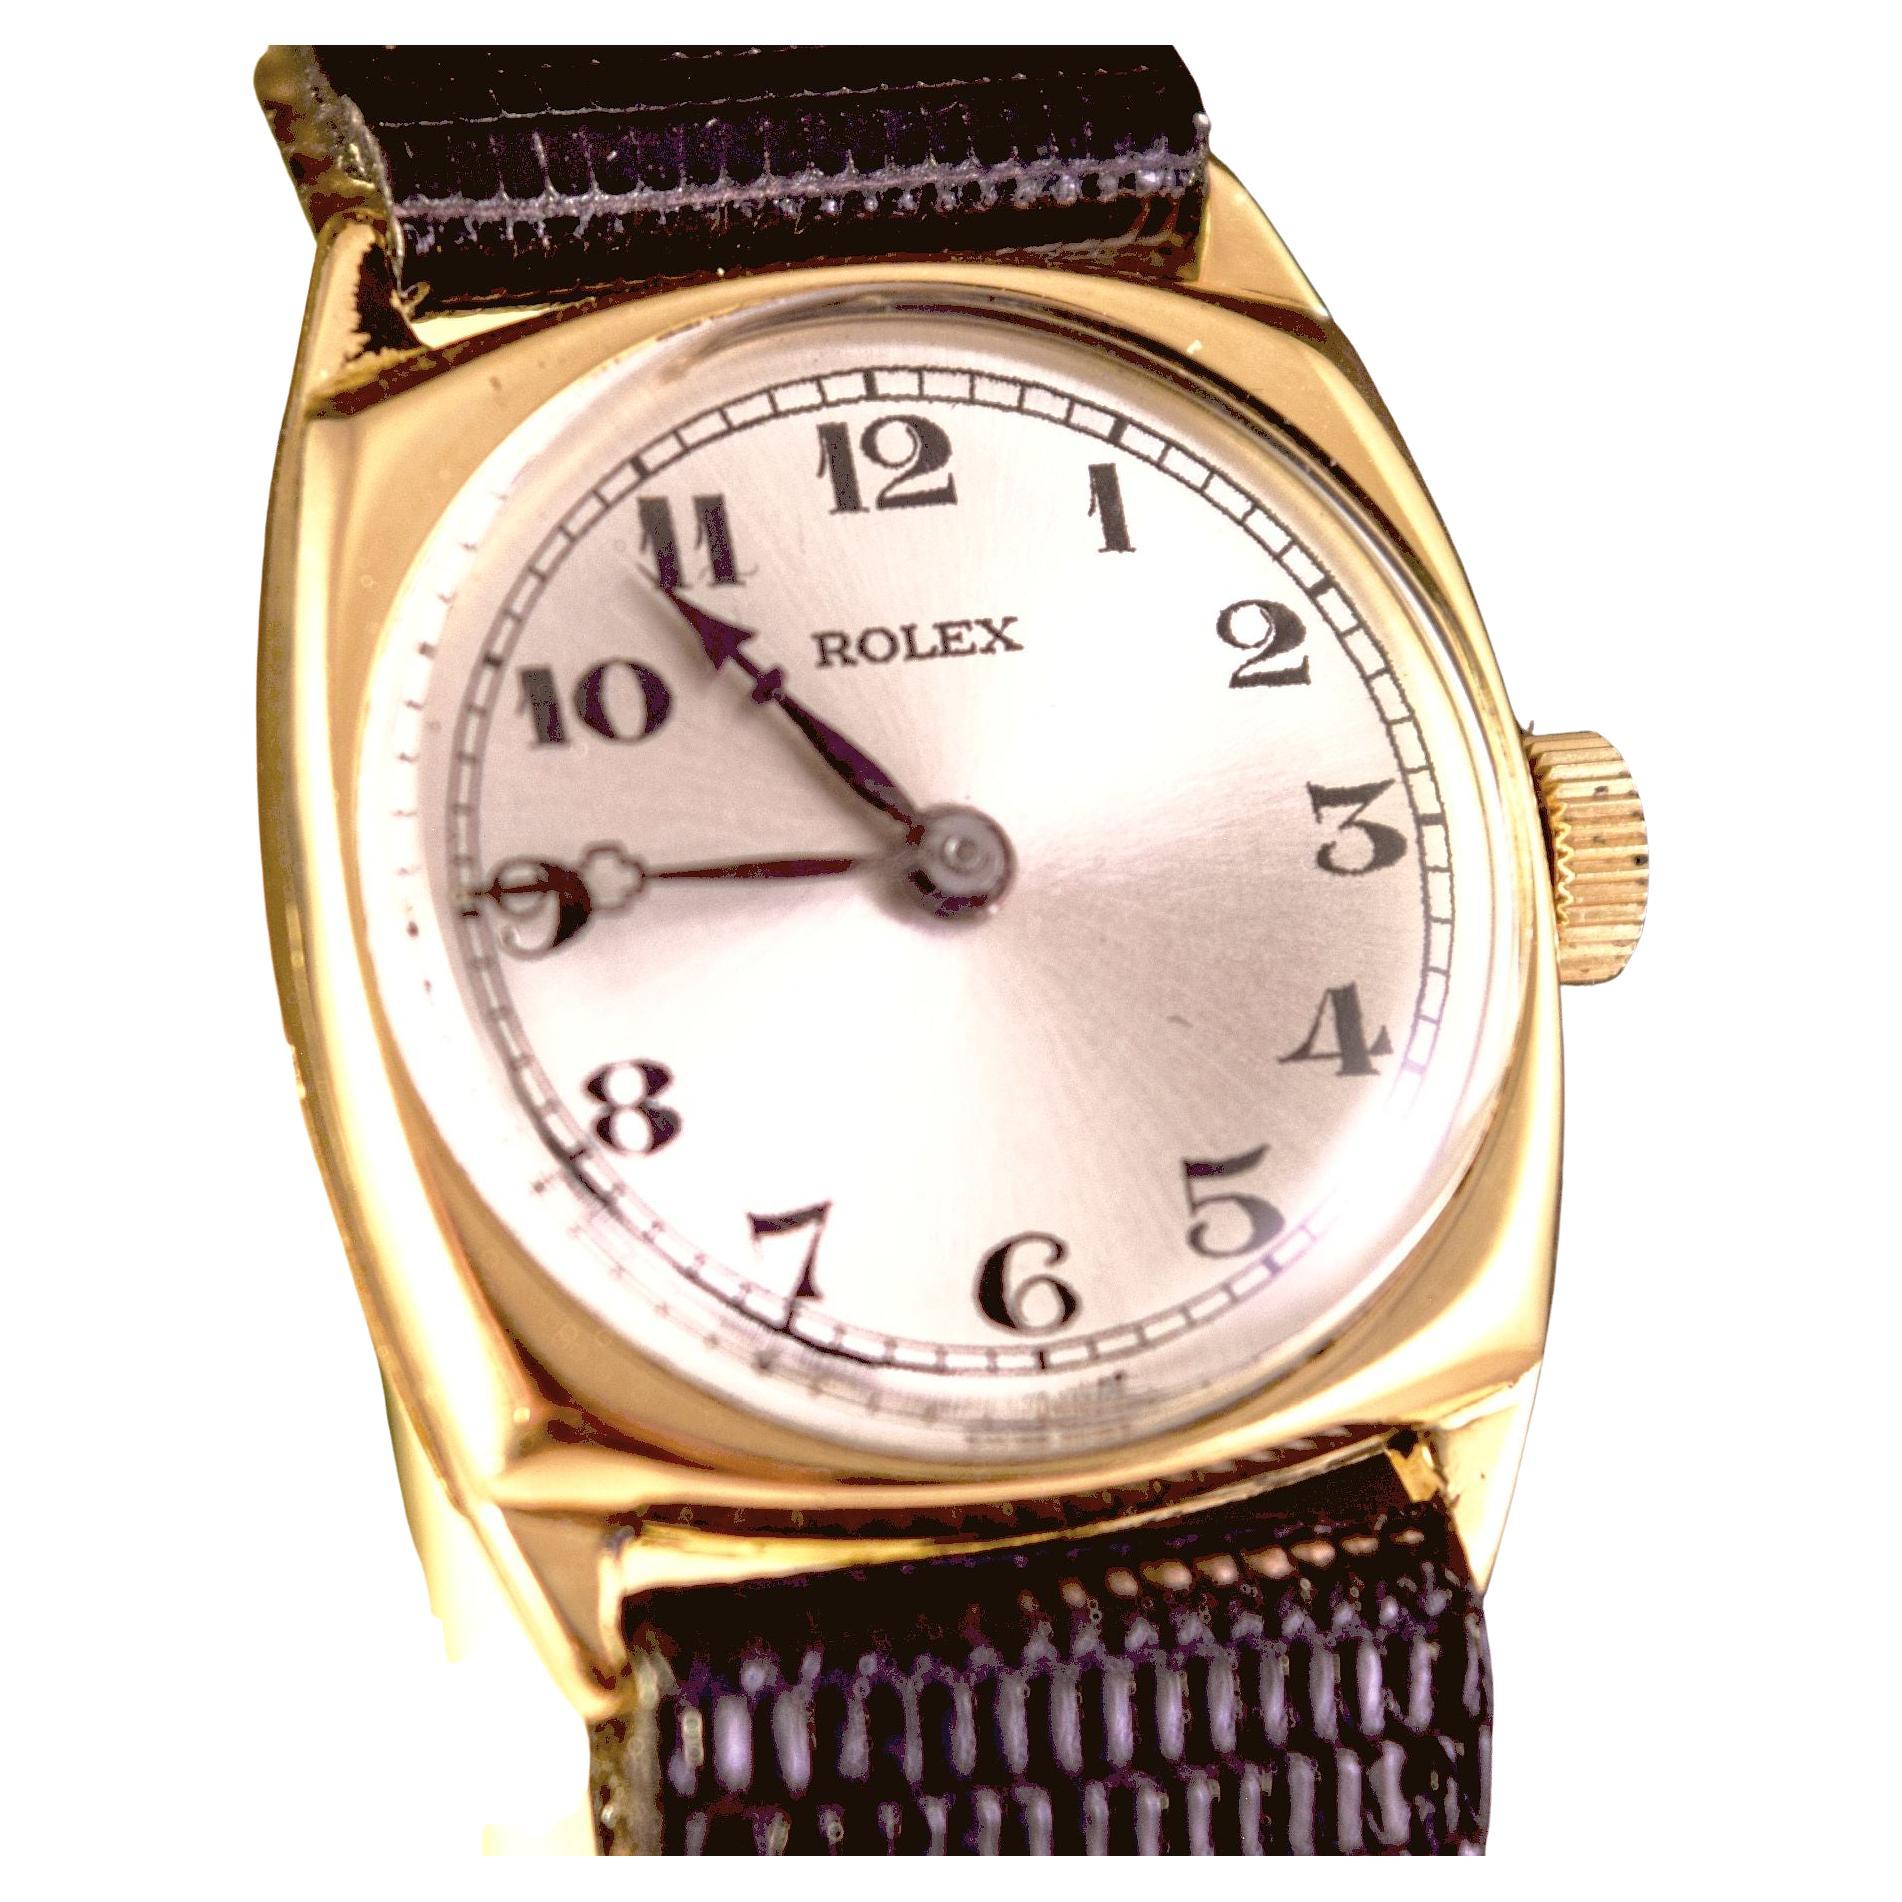 Rolex Vintage rare Cushion shape 18 K gold.1930's
This is a lovely and rare cushion shaped watch in Solid 18 K gold Case.
Solid 18 K fixed lugs.
Dial is signed Rolex black numbers.
Attractive and rare blackened steel hands.
This watch comes with one